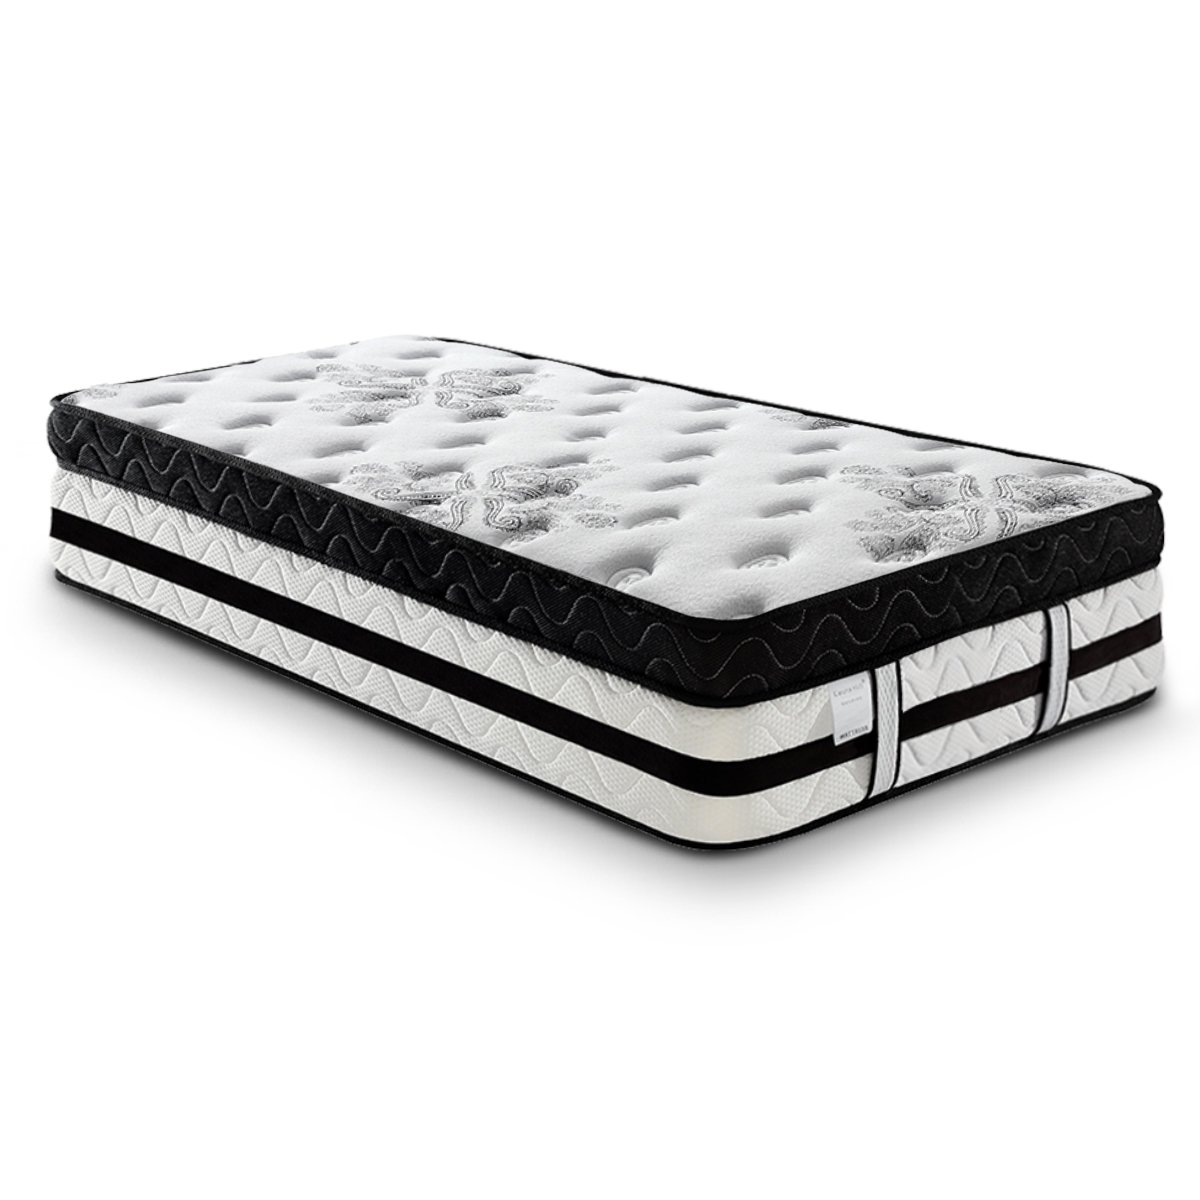 Laura Hill King Single Mattress with Euro Top - 34cm 2